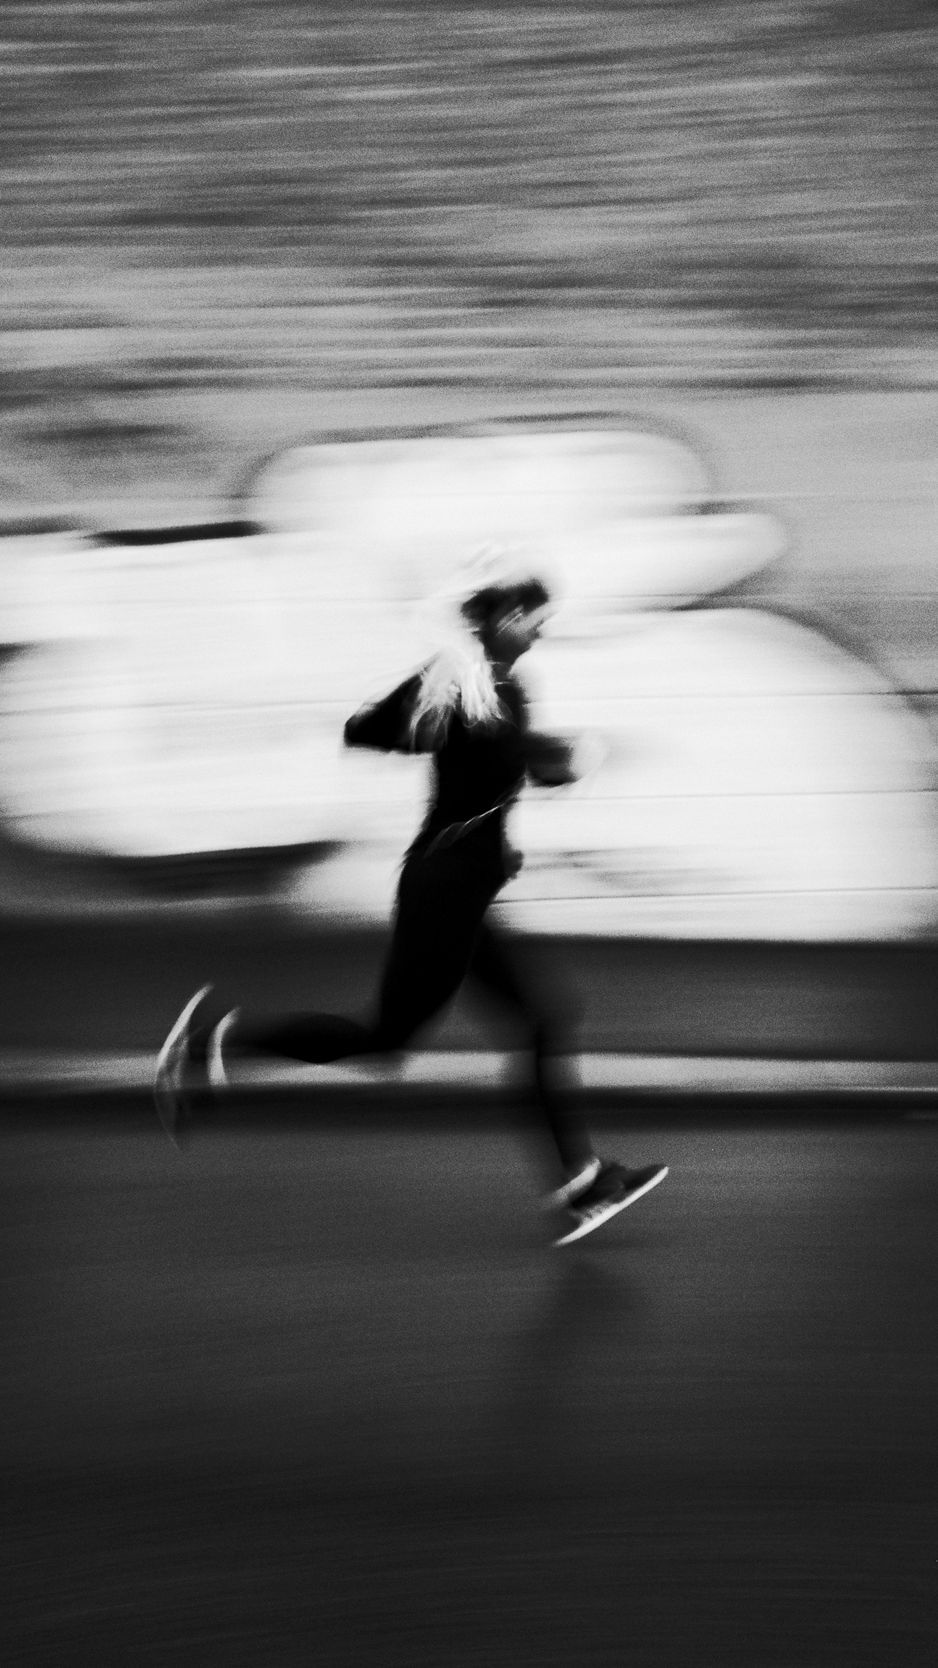 Download wallpaper 938x1668 running, bw, athlete, outlines, speed